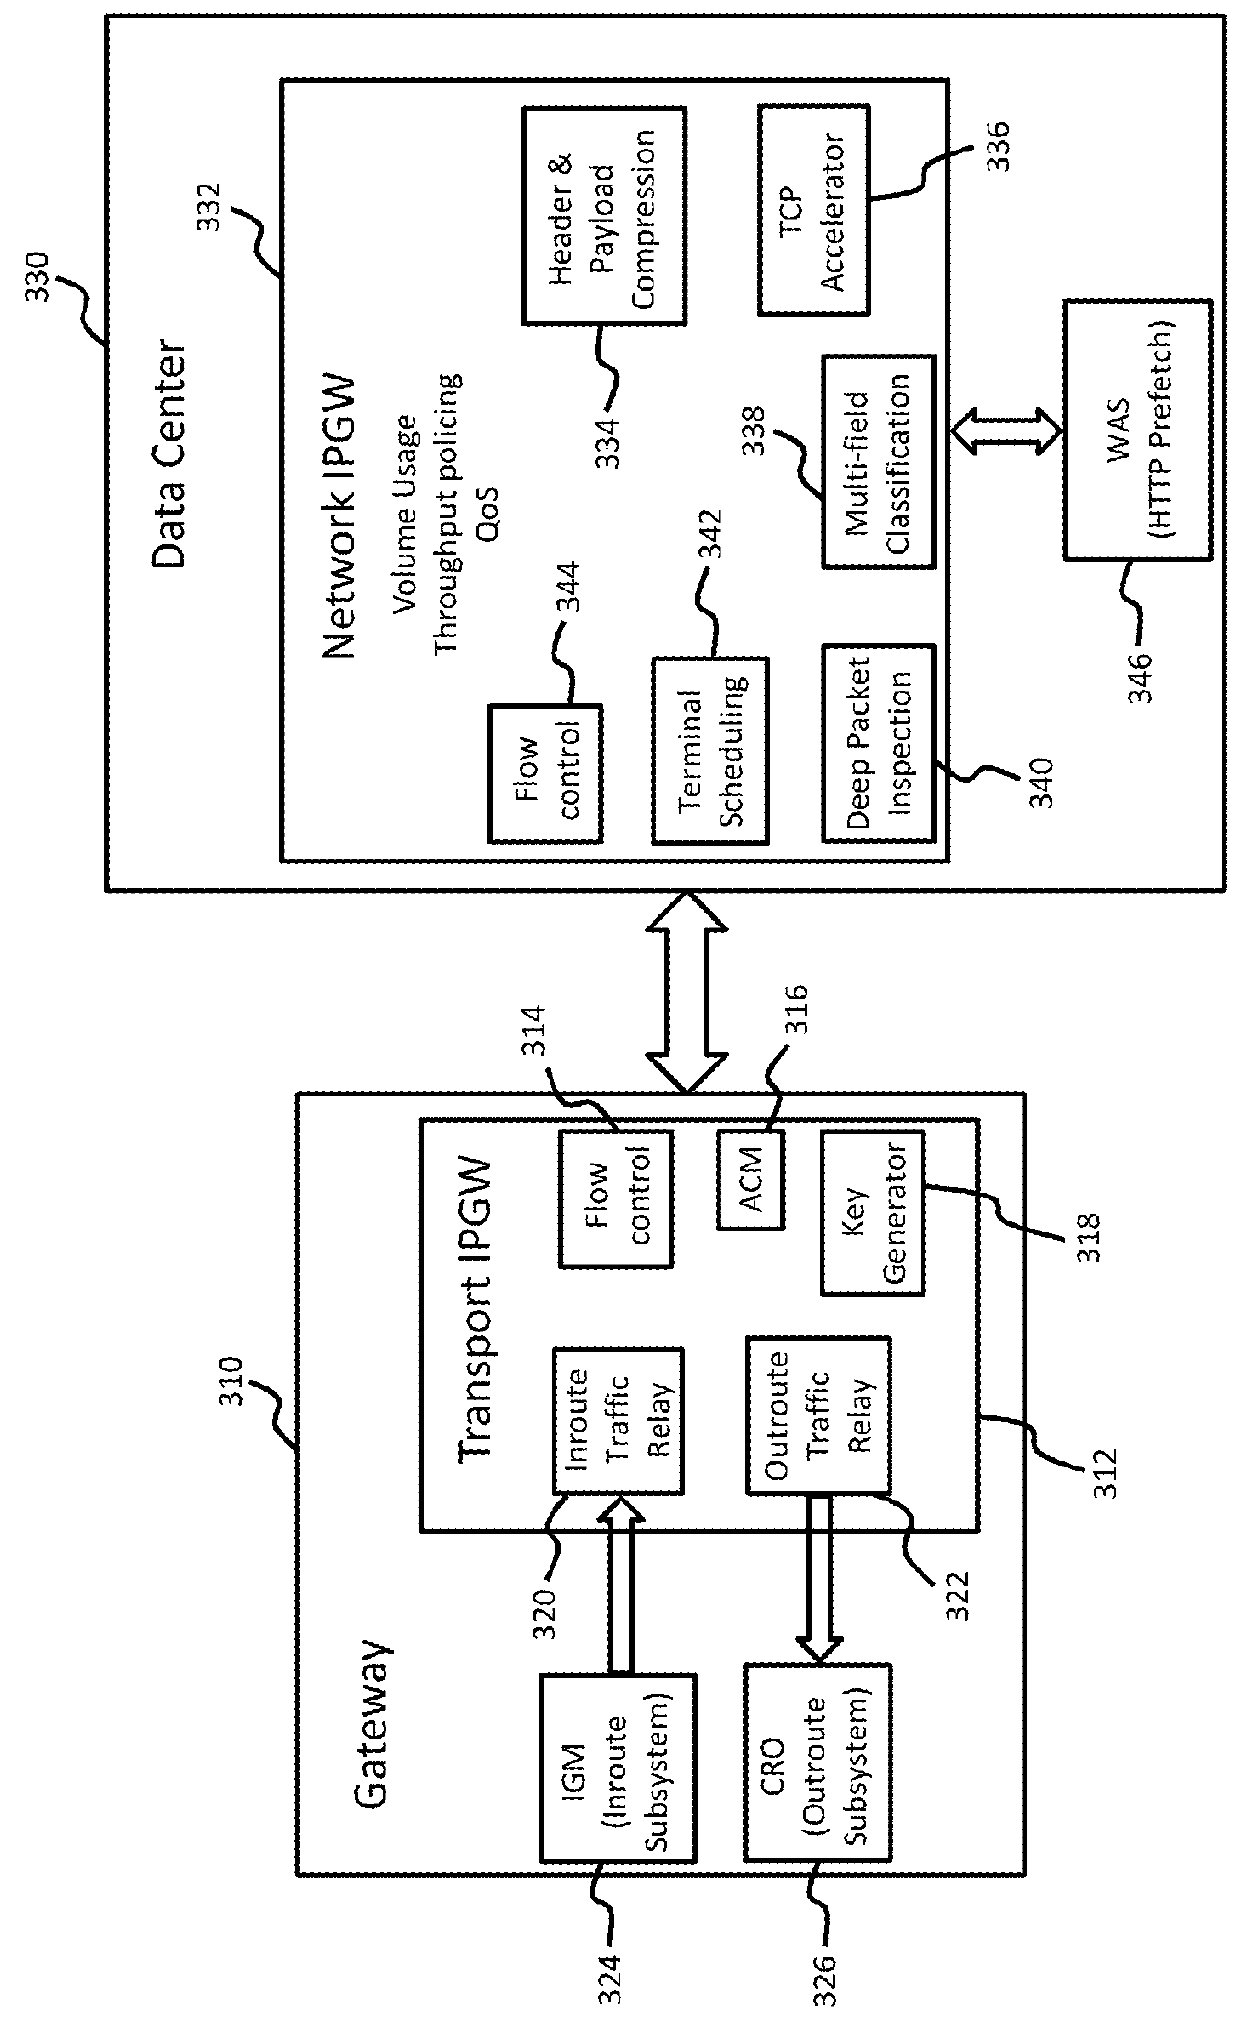 Distributed gateways with centralized data center for high throughput satellite (HTS) spot beam network